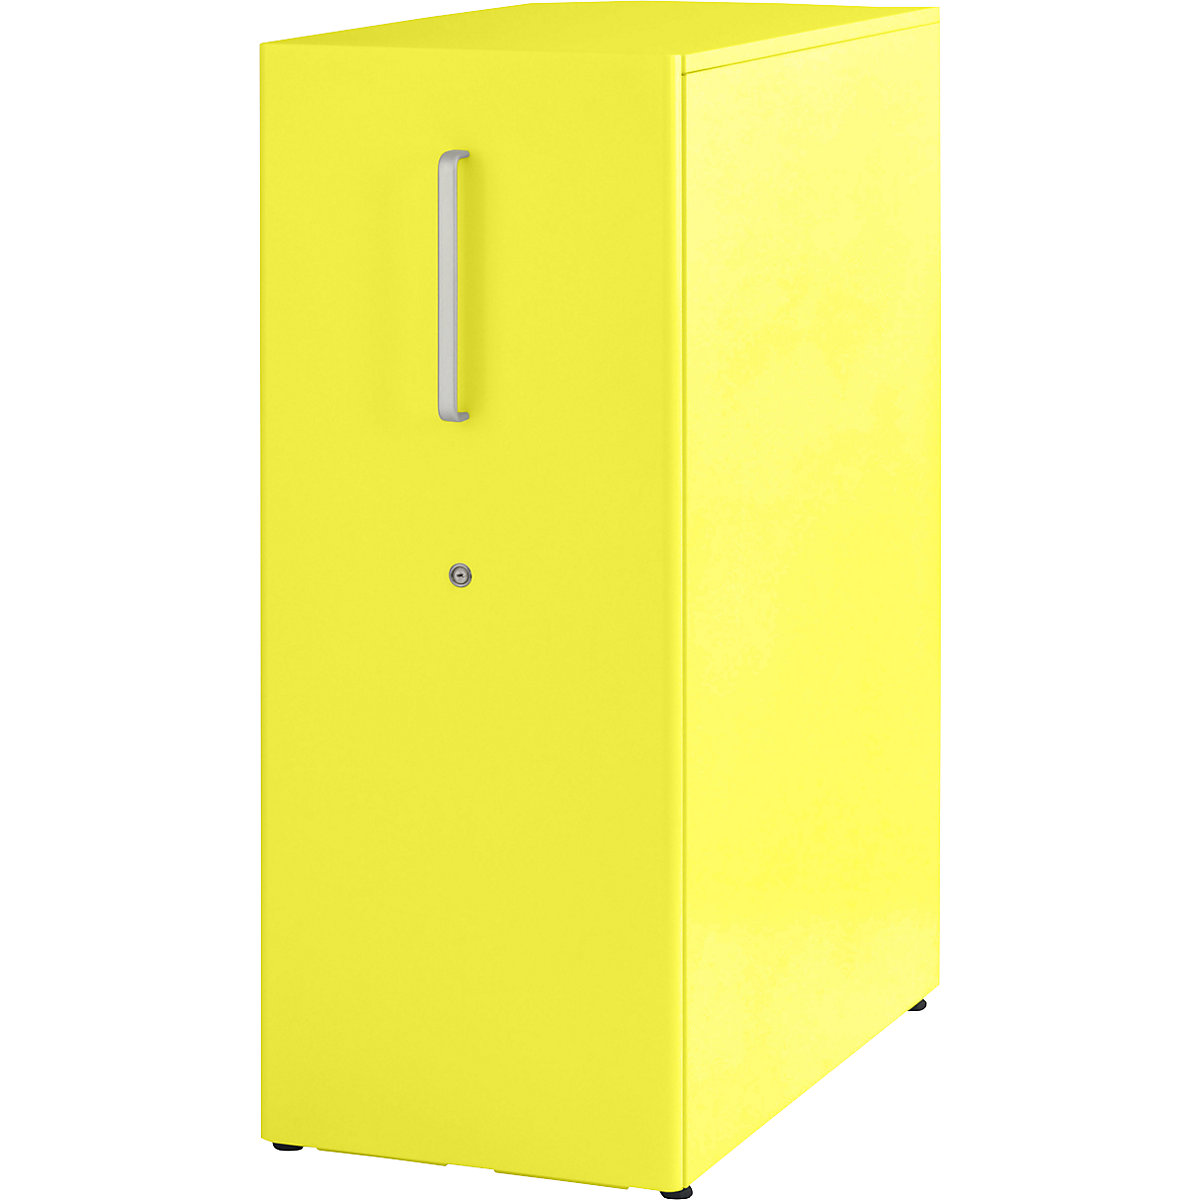 Tower™ 3 add-on furniture, with worktop – BISLEY, for the right side, 1 shelf, zinc yellow-19